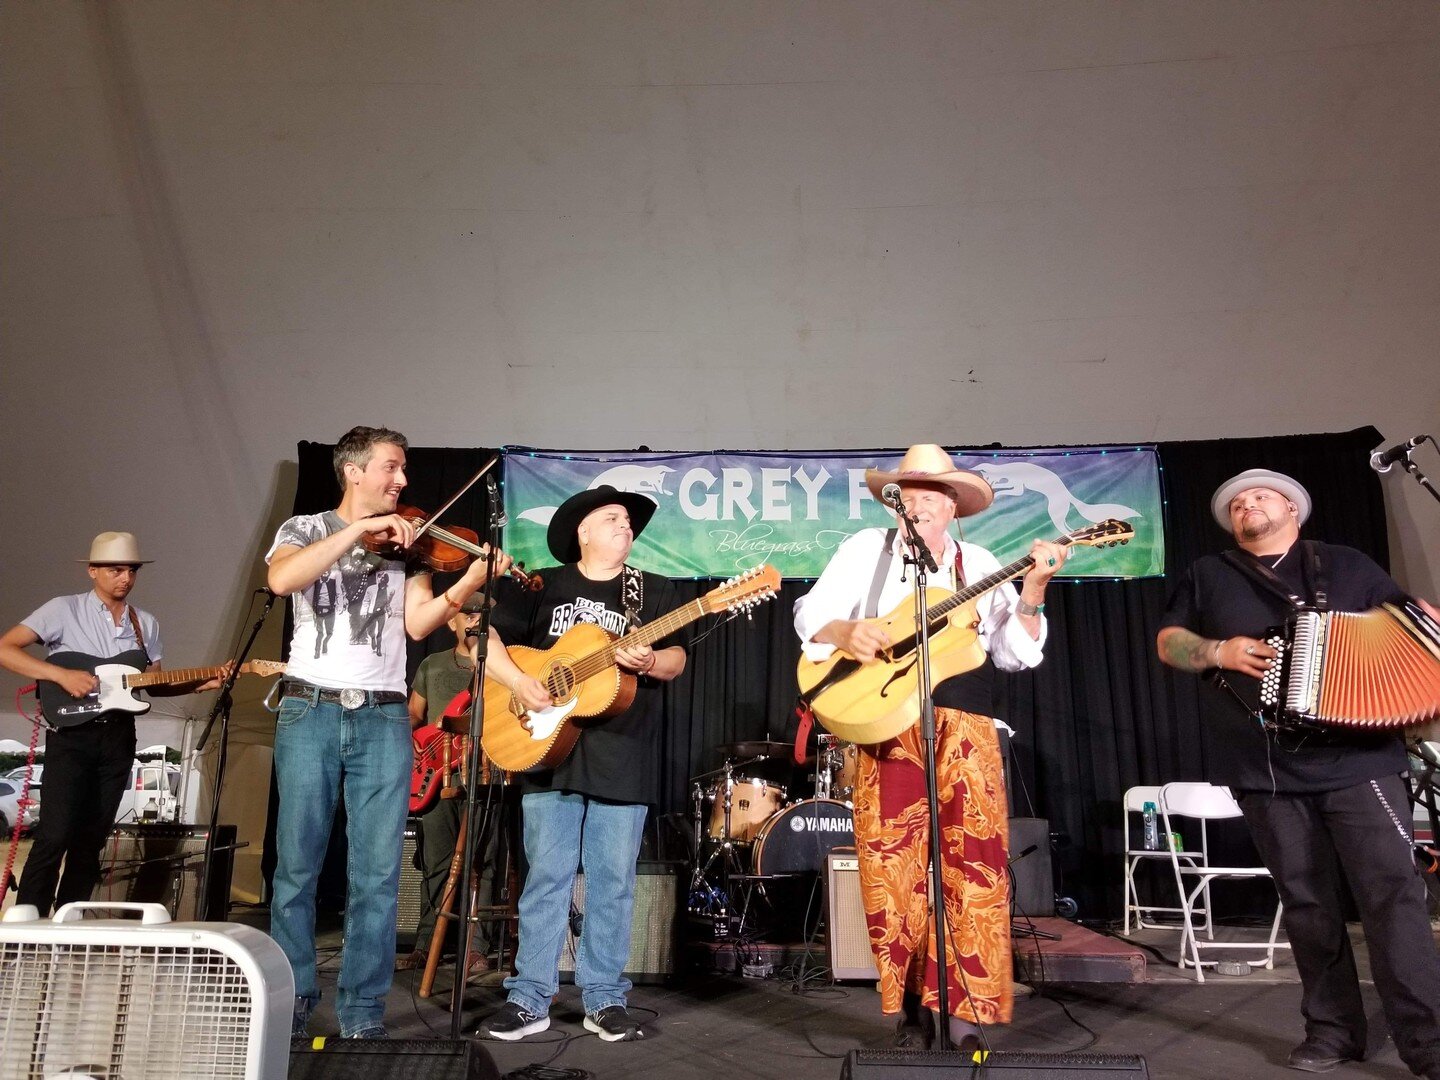 A few more moments from last weekend at @greyfoxbluegrass - flying in the Free Mexican Airforce with Peter Rowan and the Texmaniacs in the dance tent Saturday night, the awe-inspiring playing of @michaelclevelandfiddle and Flame Keeper, and keeping c